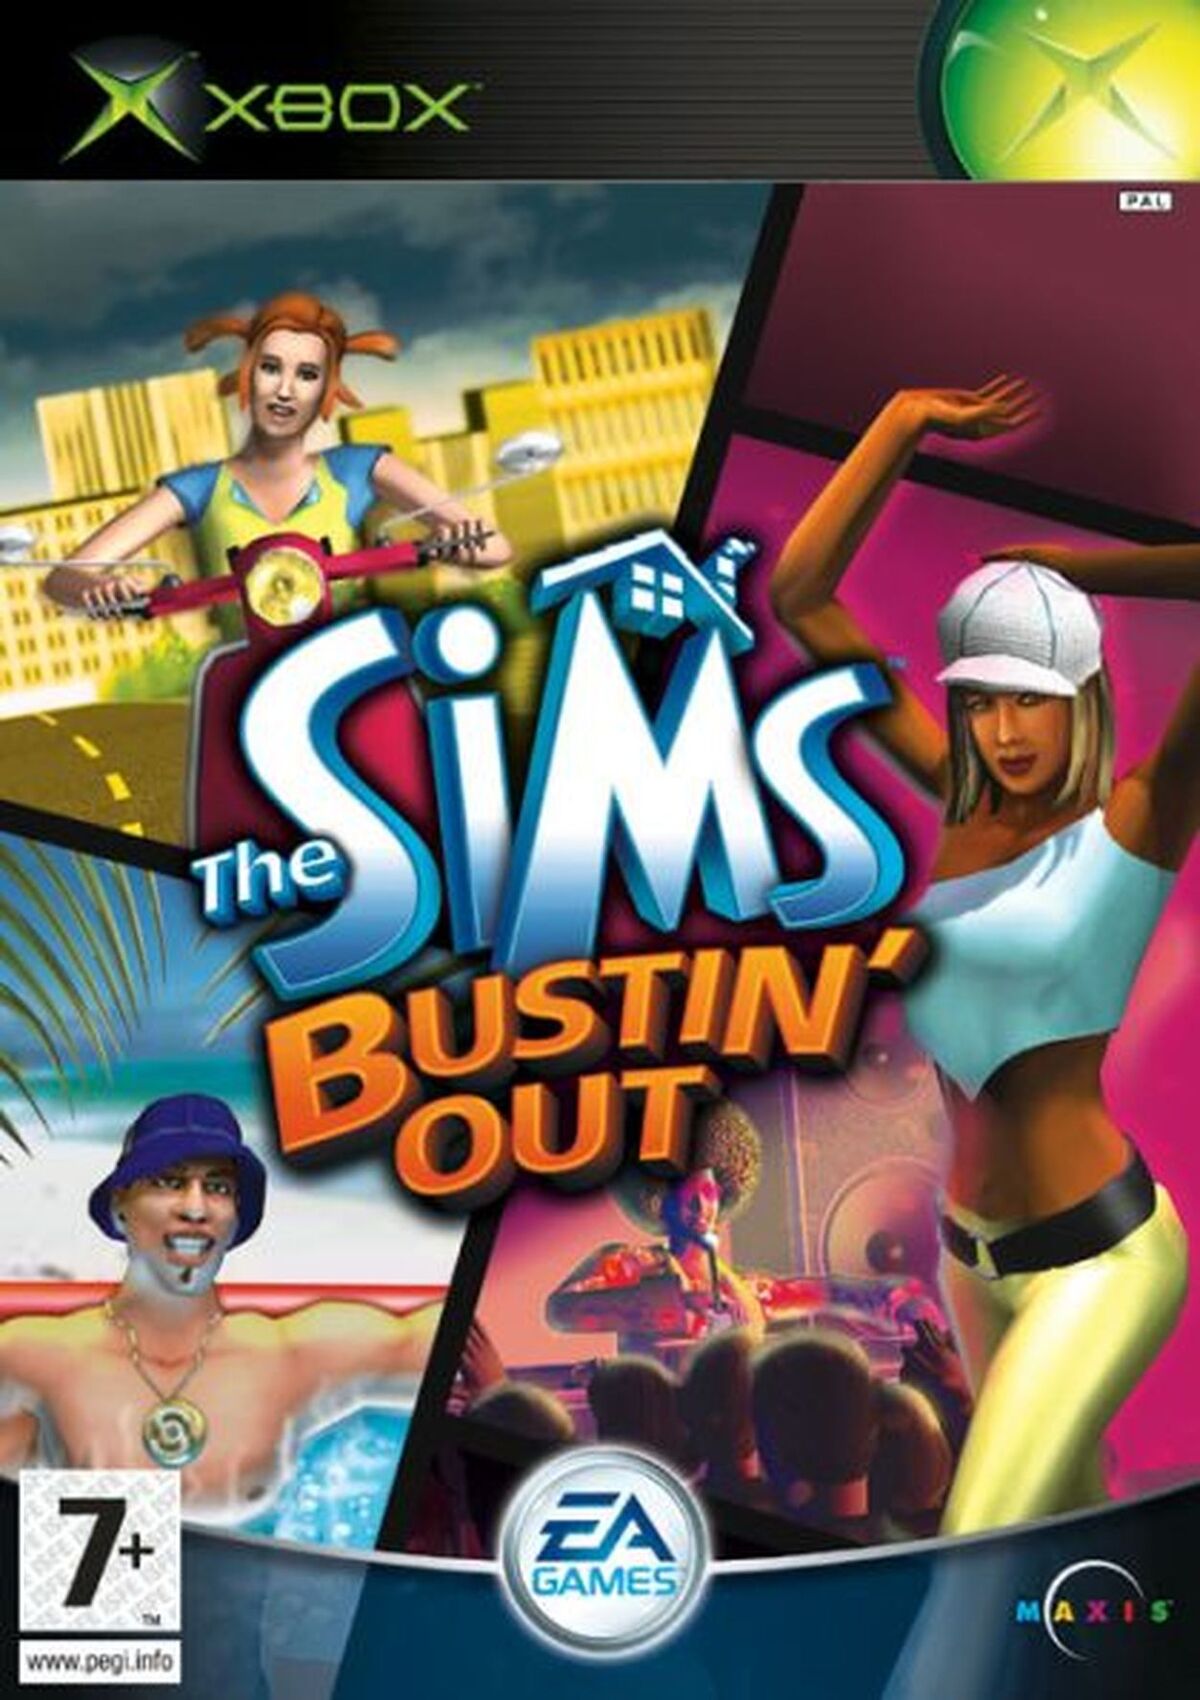 The Sims Bustin' Out Online Impressions - GameSpot